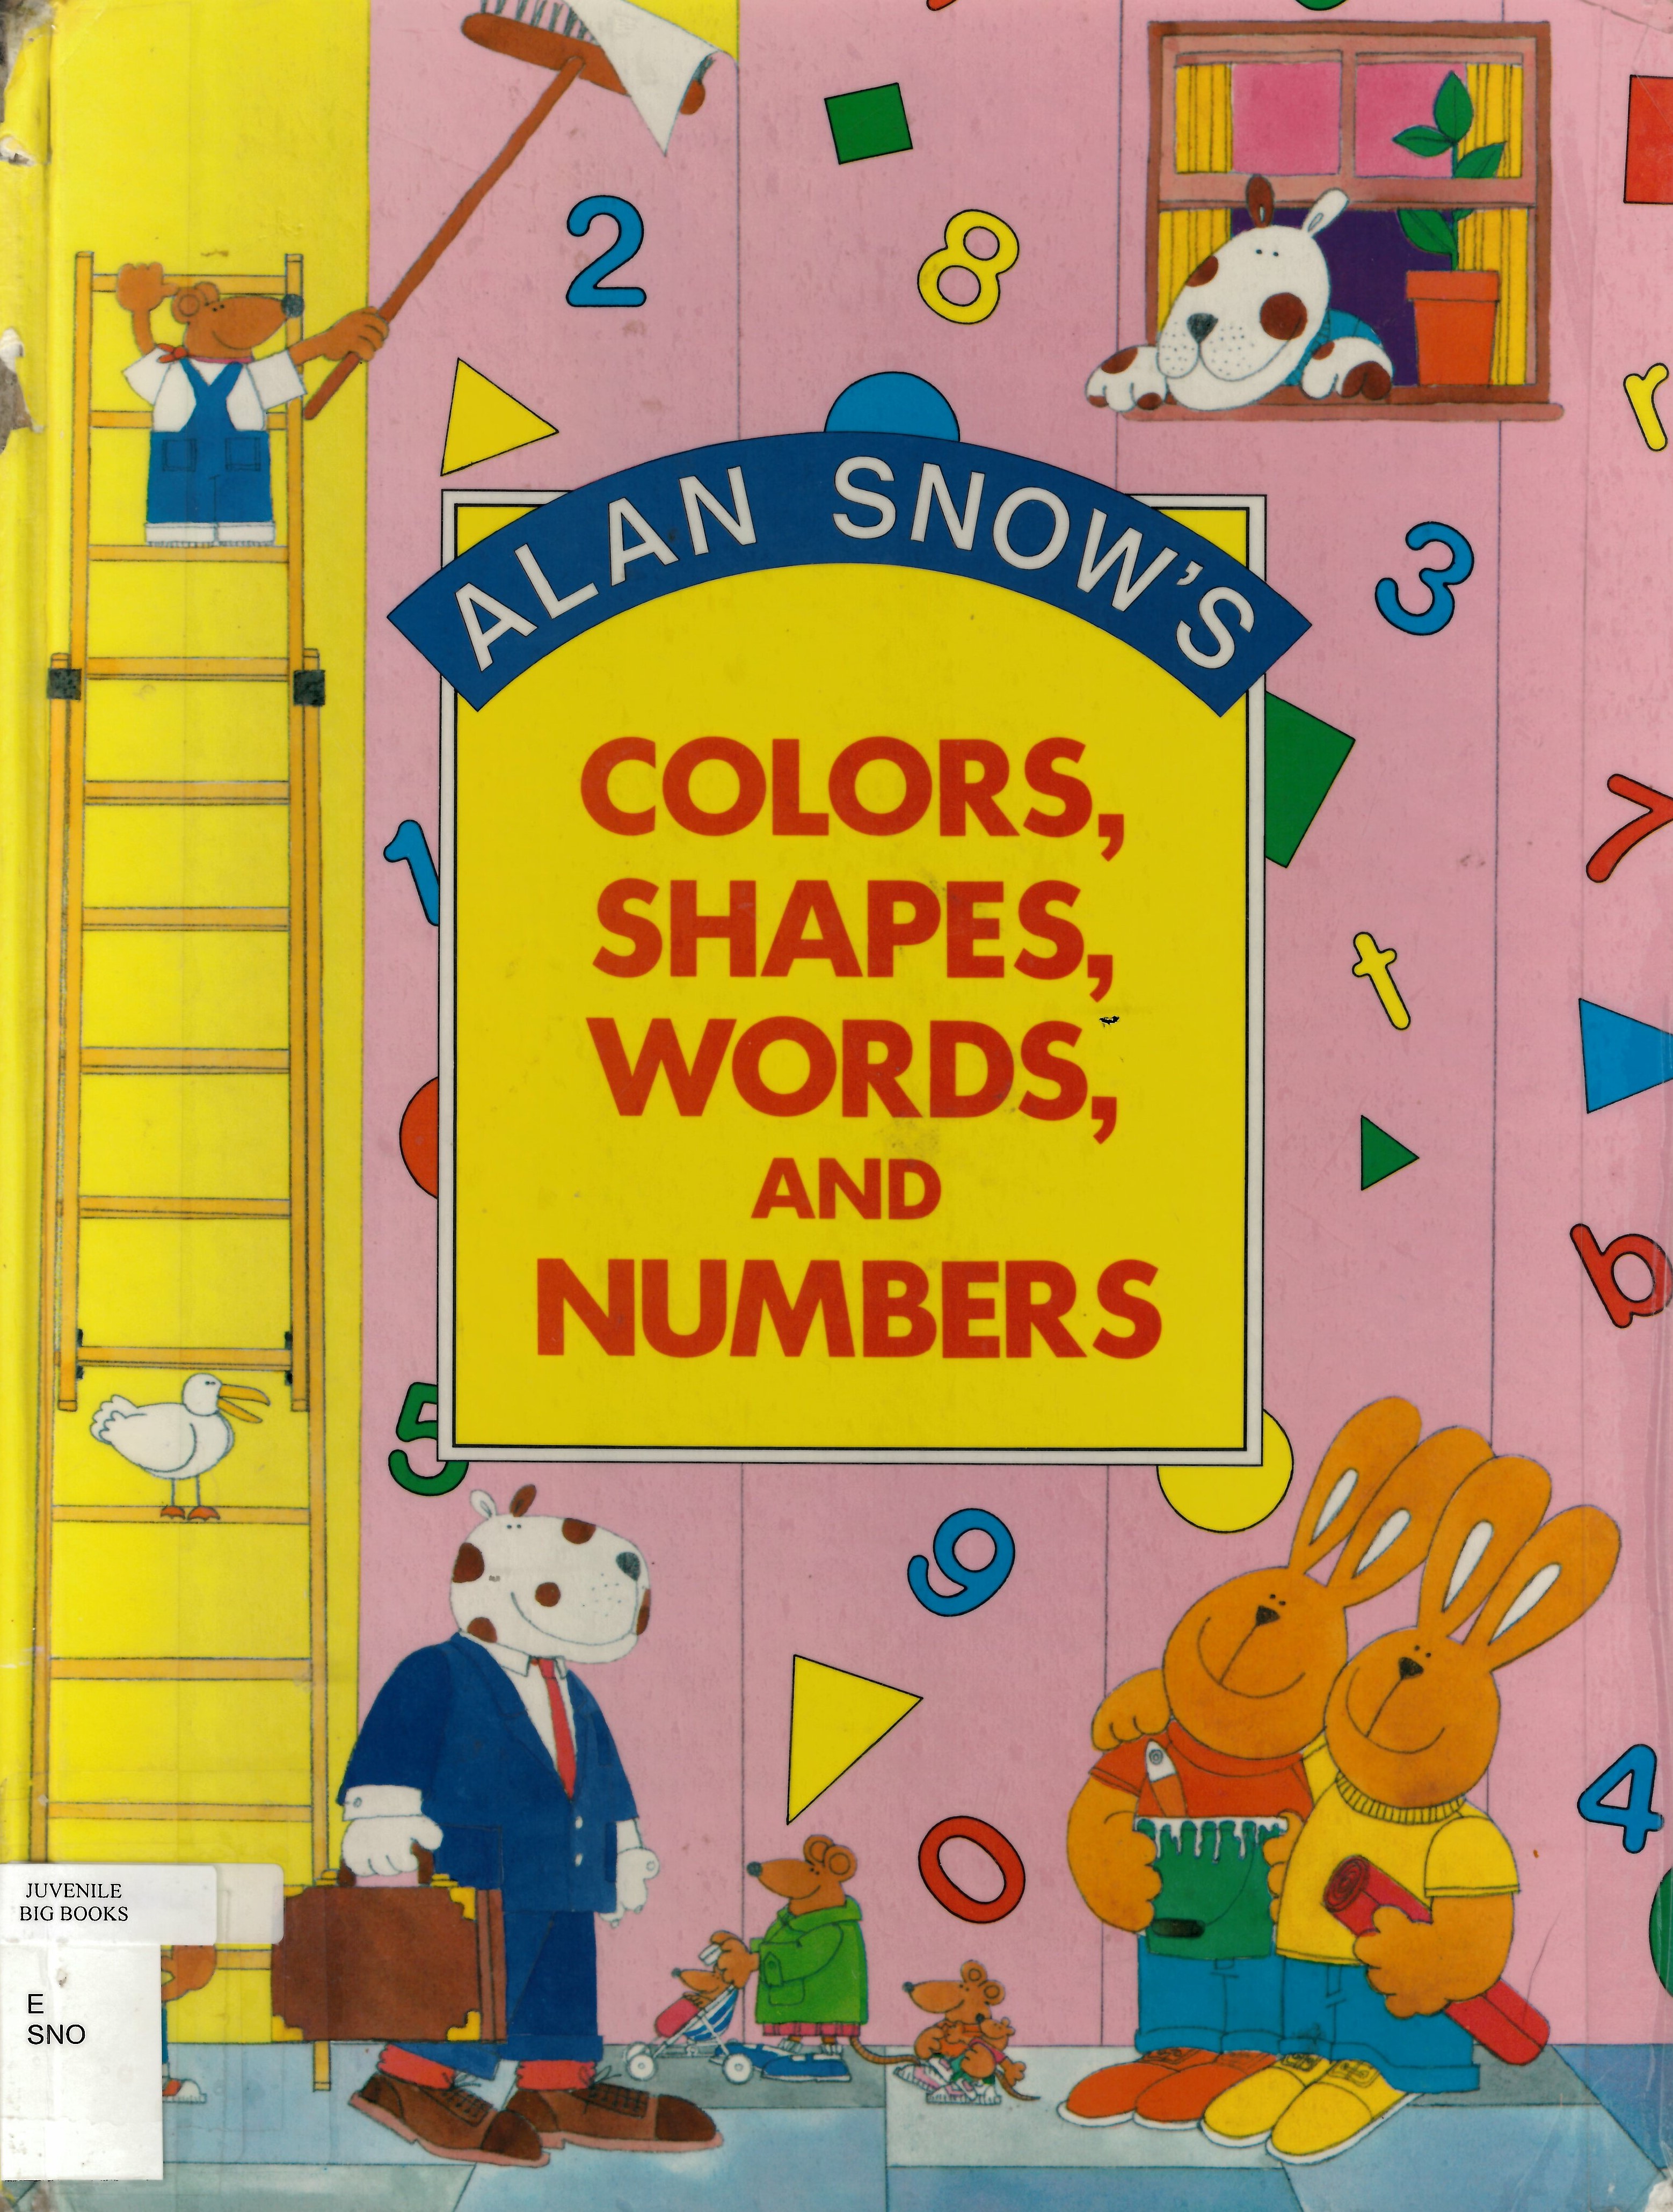 Colors, shapes, words, and numbers